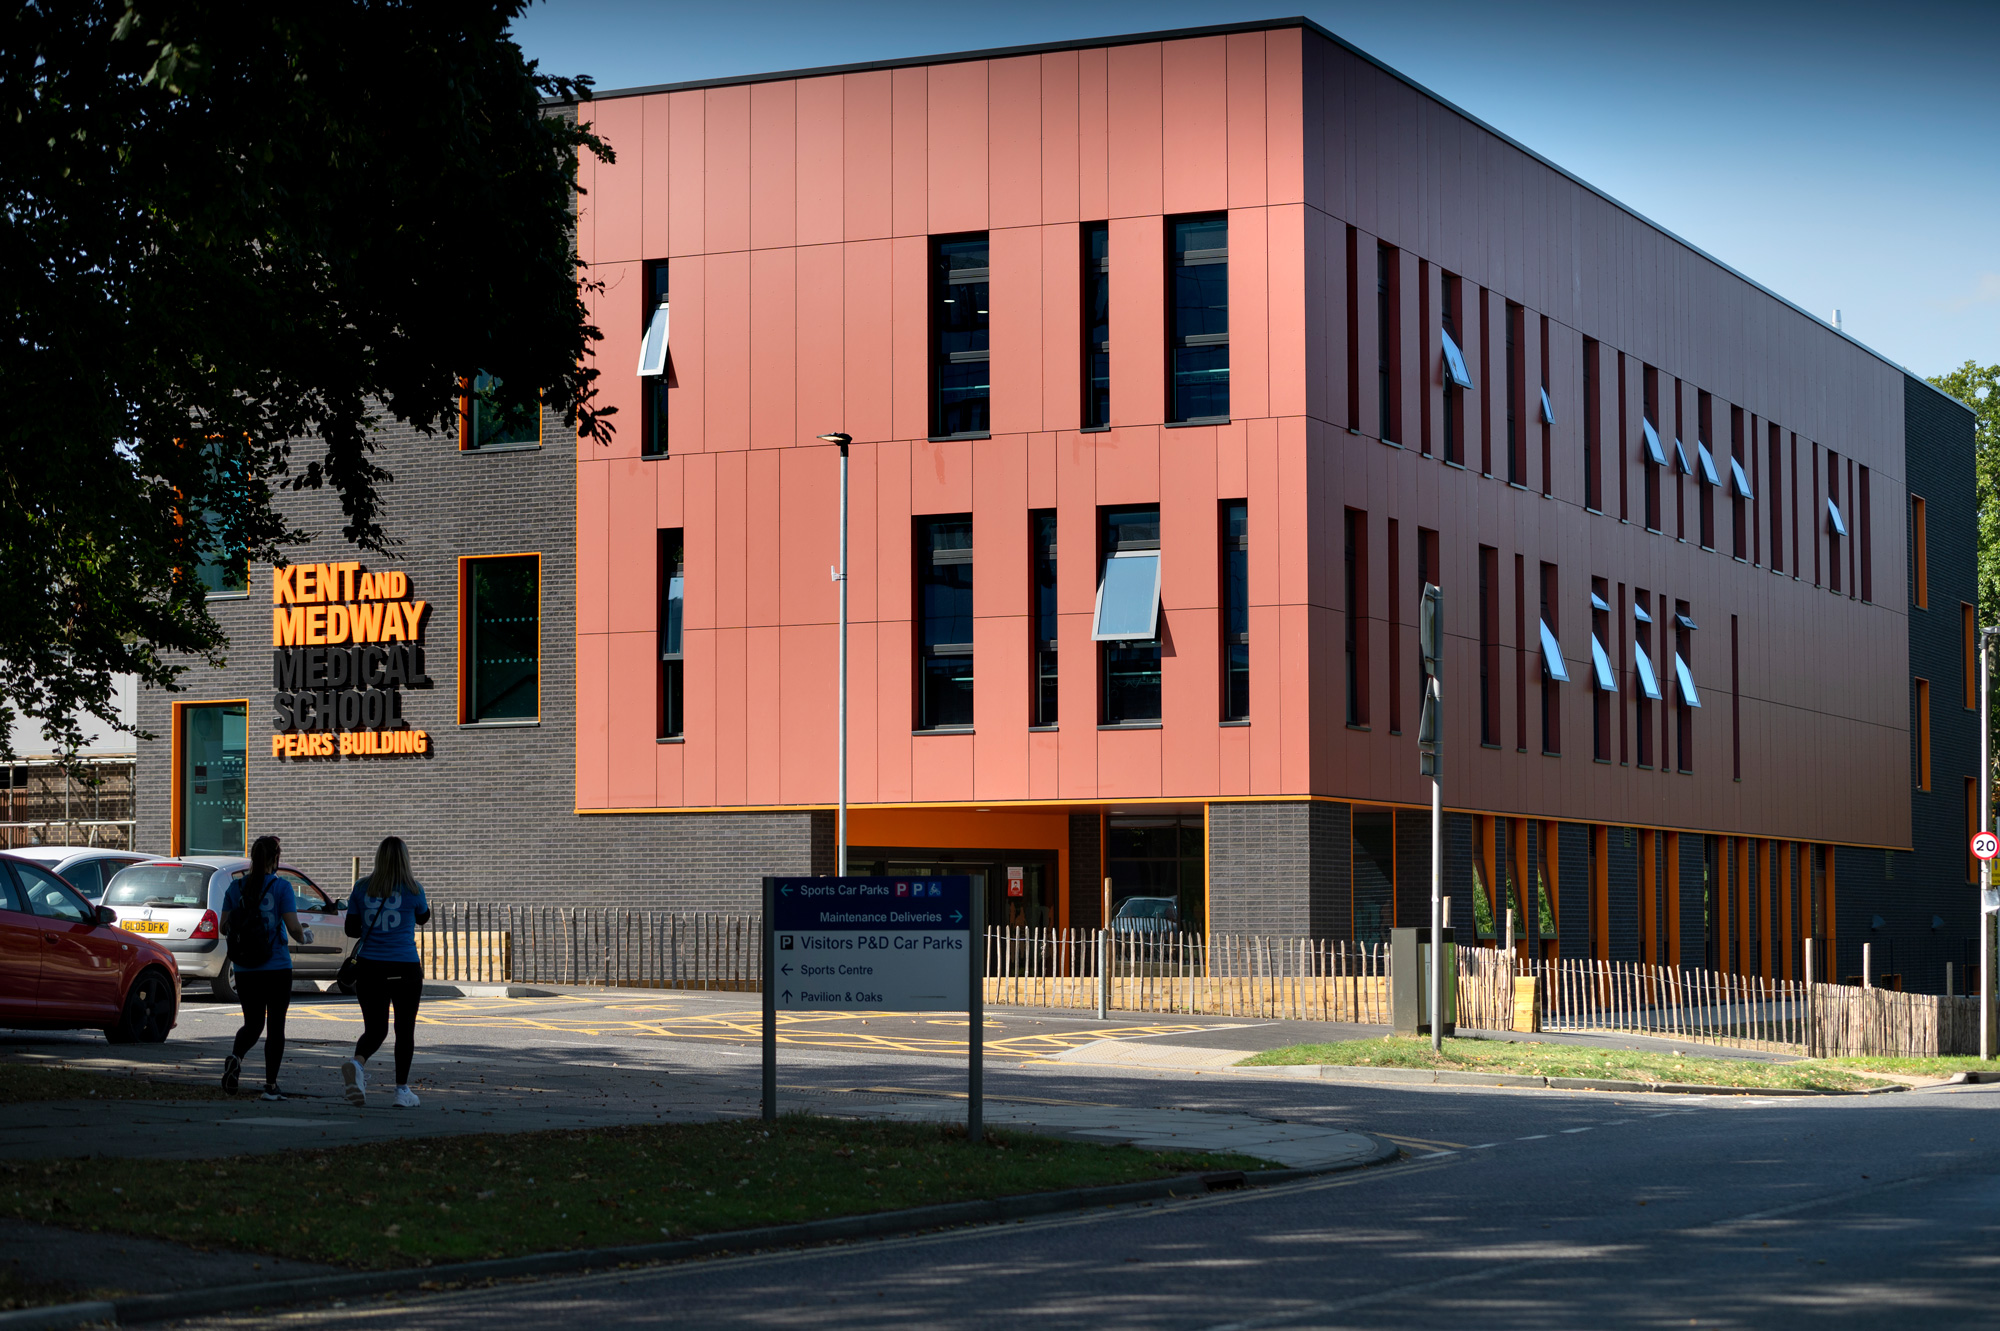 The exterior of the Pears Building, Kent campus